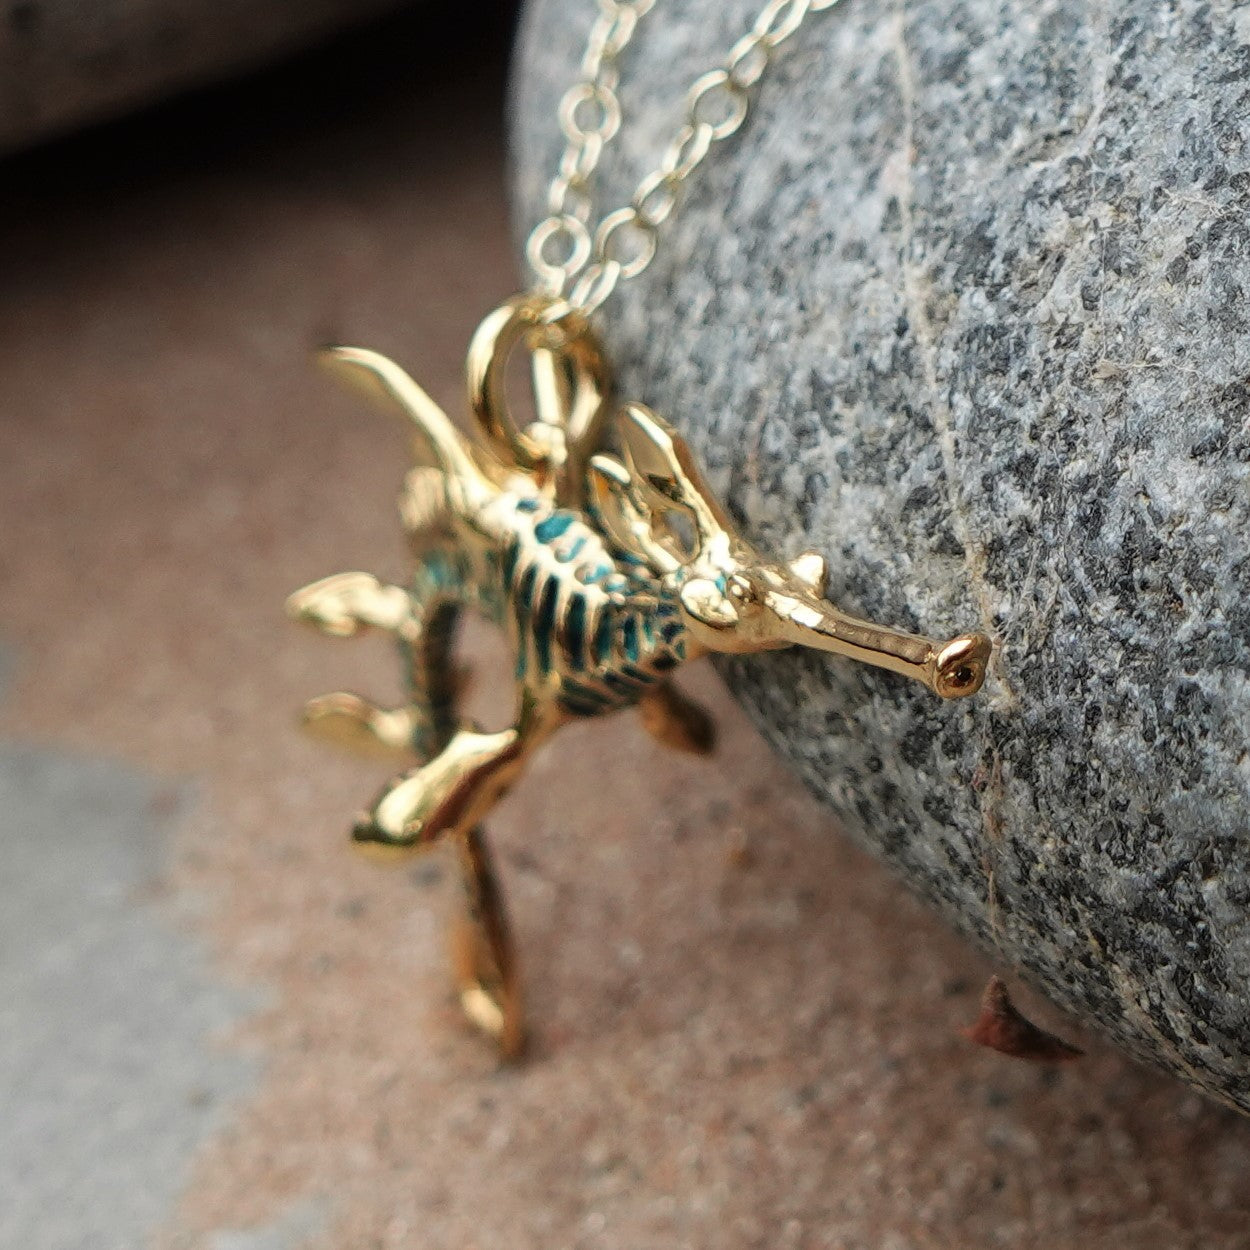 Gold sea dragon necklace, 3D weedy seadragon pendant with a blue patina and a gold chain. Handmade to order. © Adrian Ashley